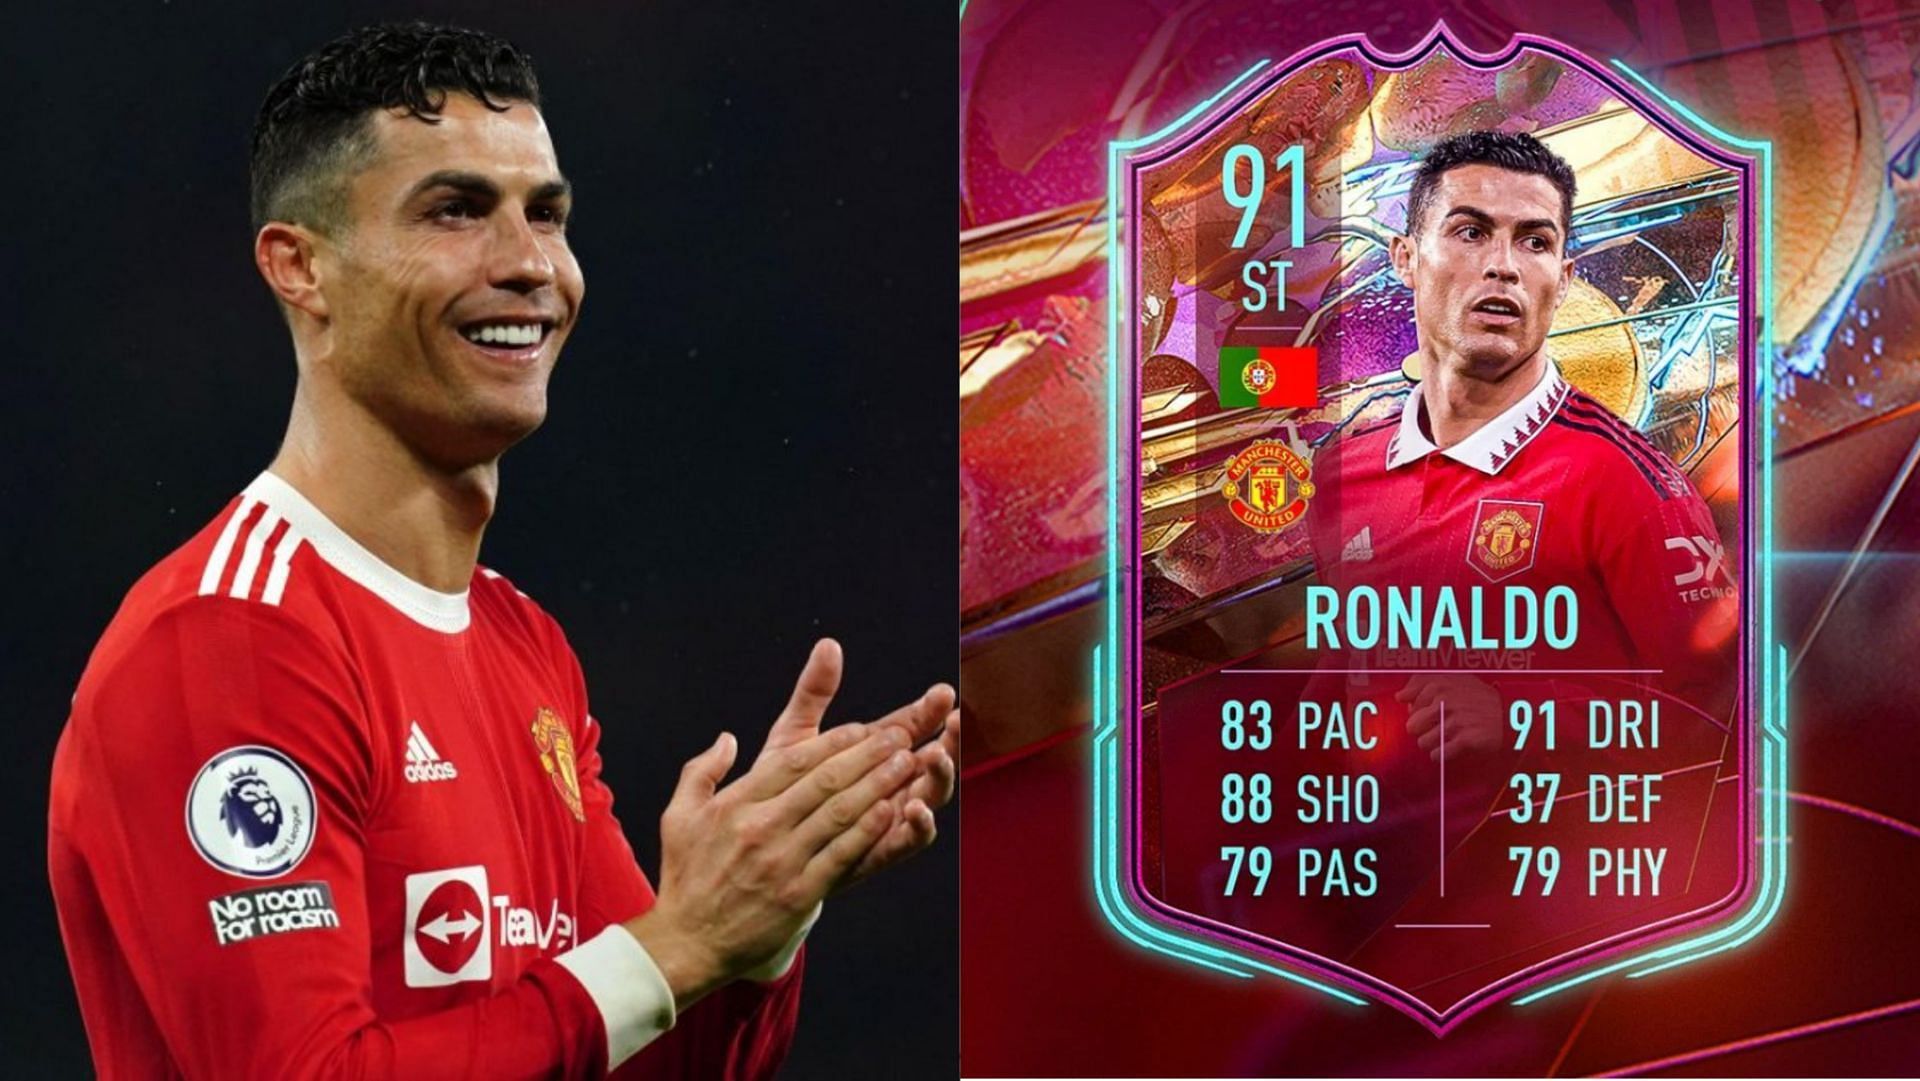 Ronaldo has received a special card in the Rulebreakers promo (Images via Getty, EA Sports)